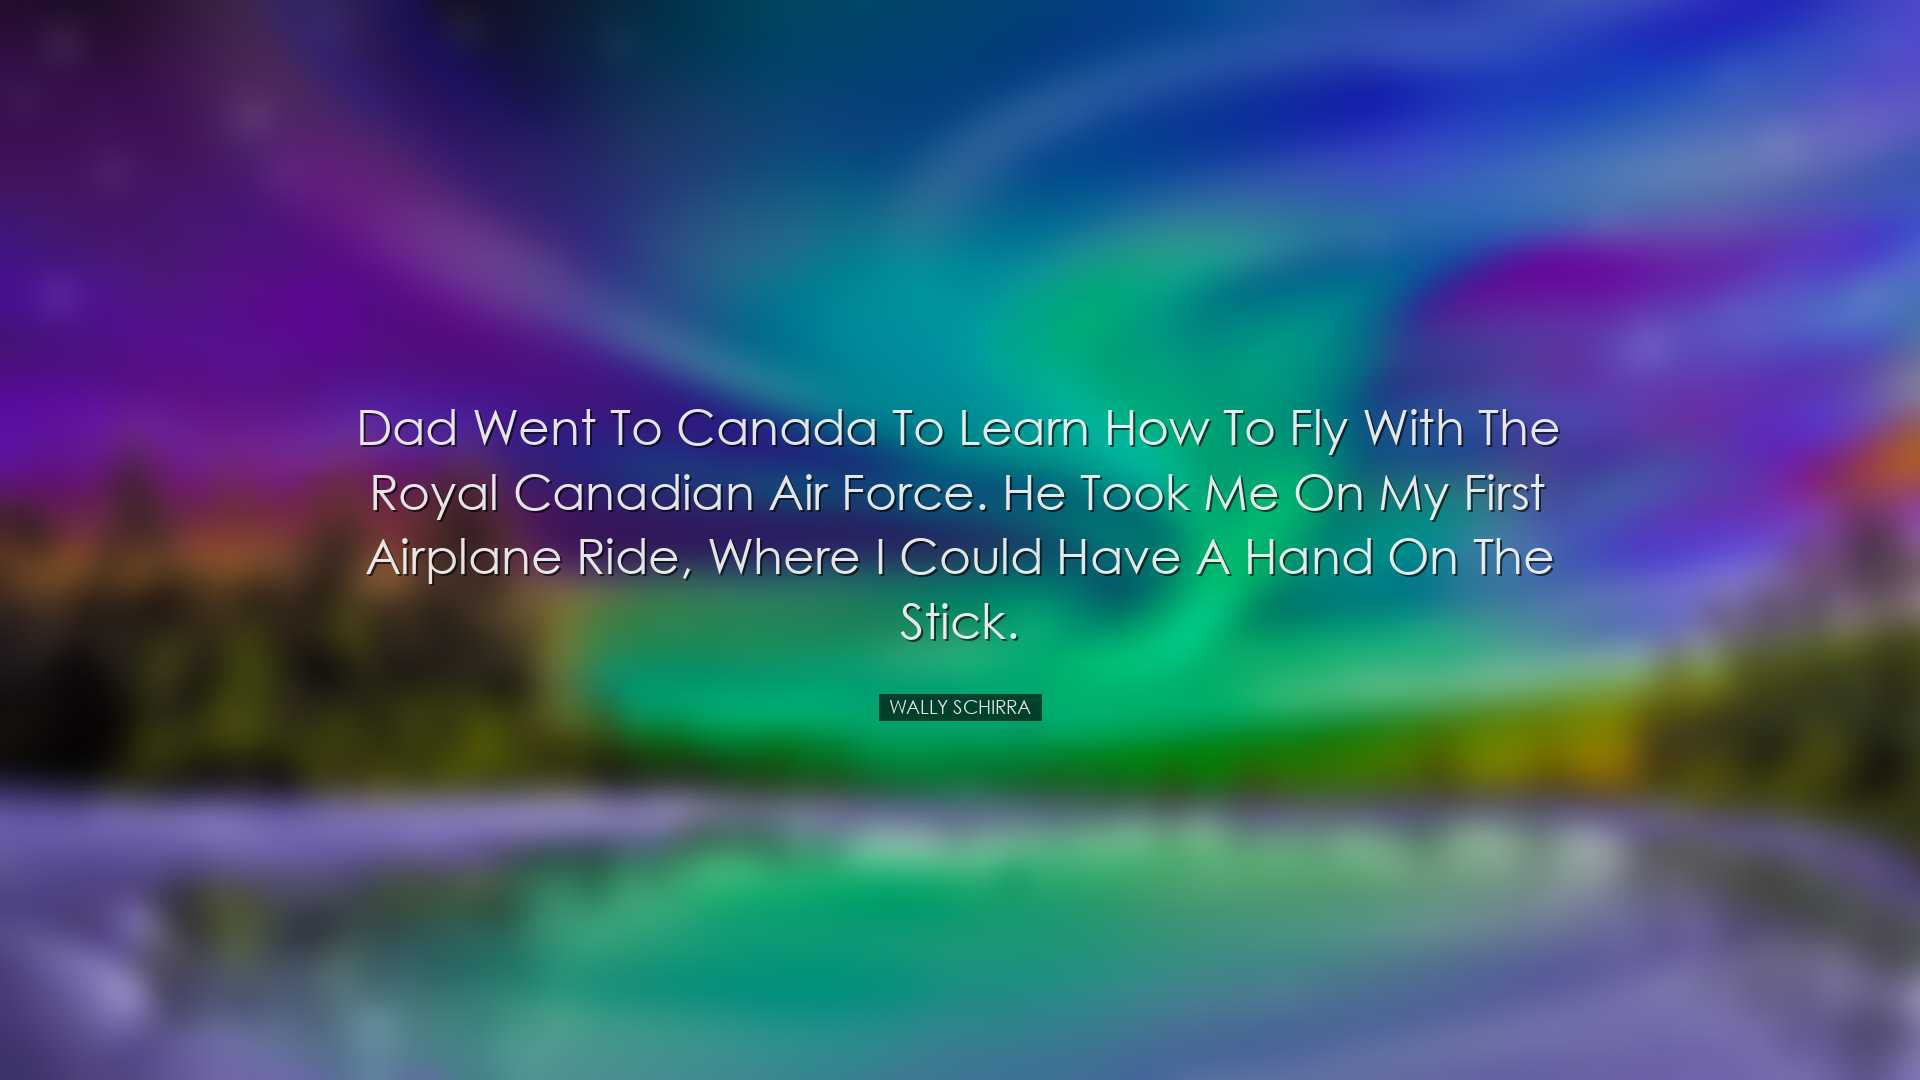 Dad went to Canada to learn how to fly with the Royal Canadian Air